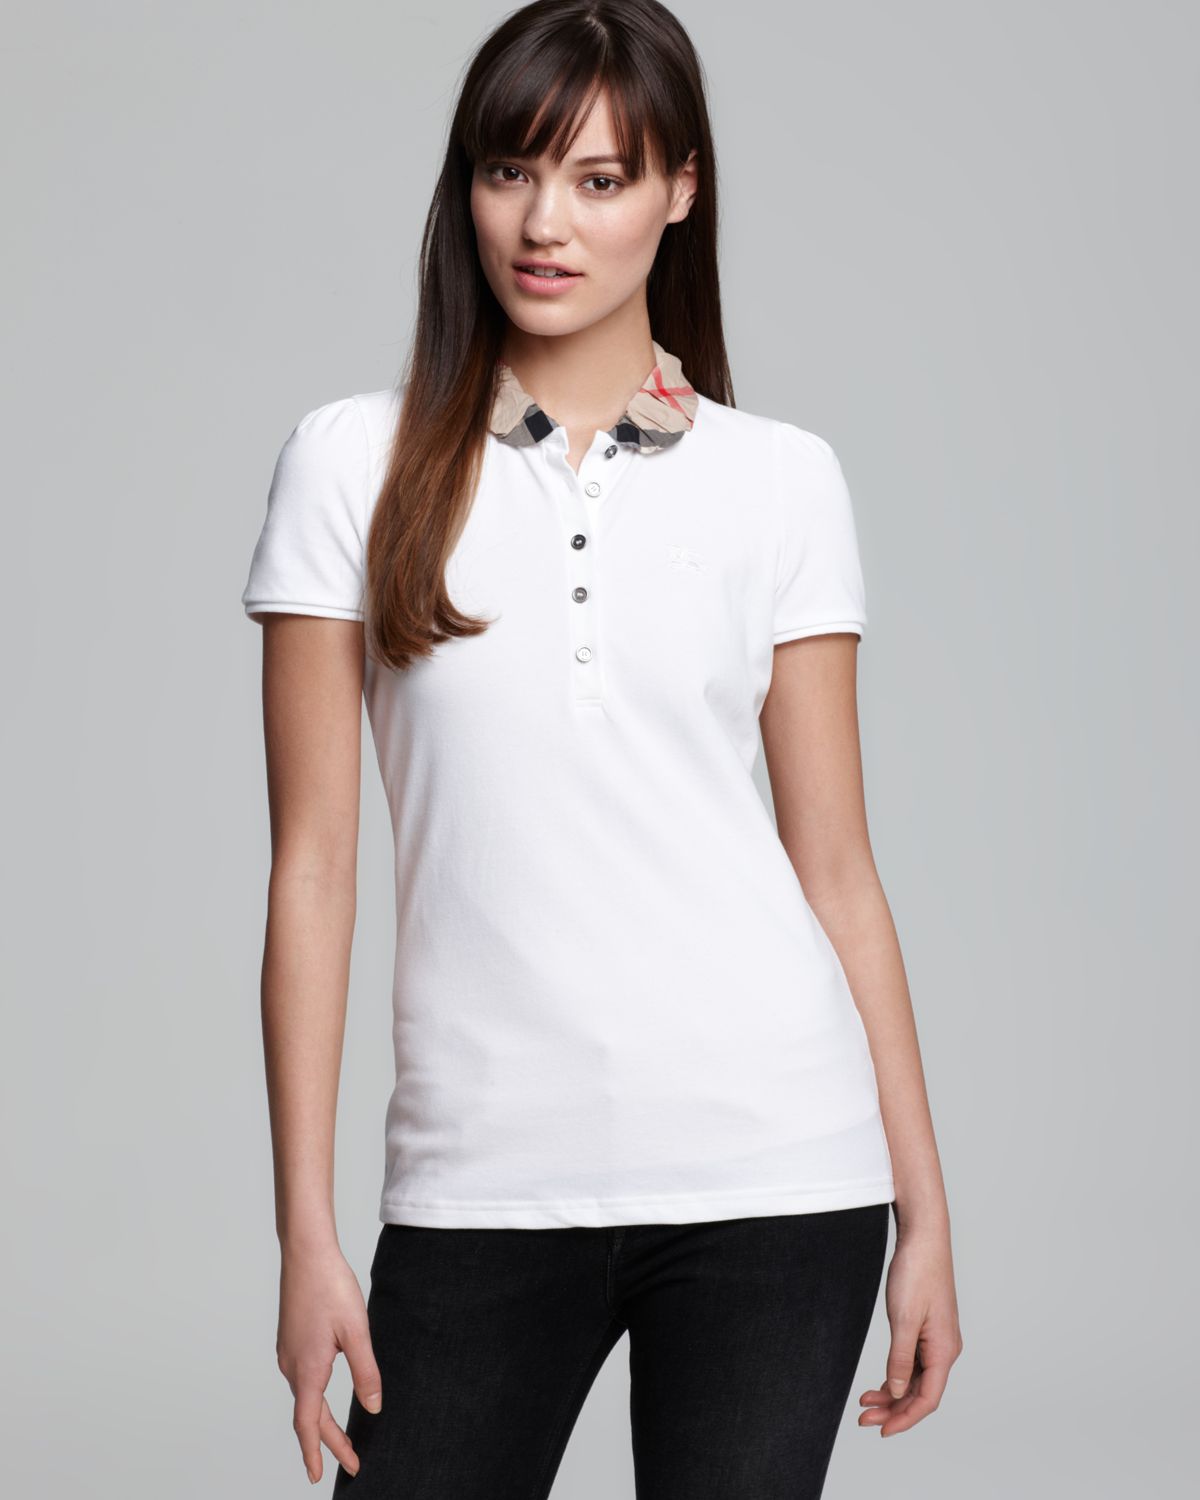 Lyst - Burberry Brit Polo Shirt with Check Collar in White